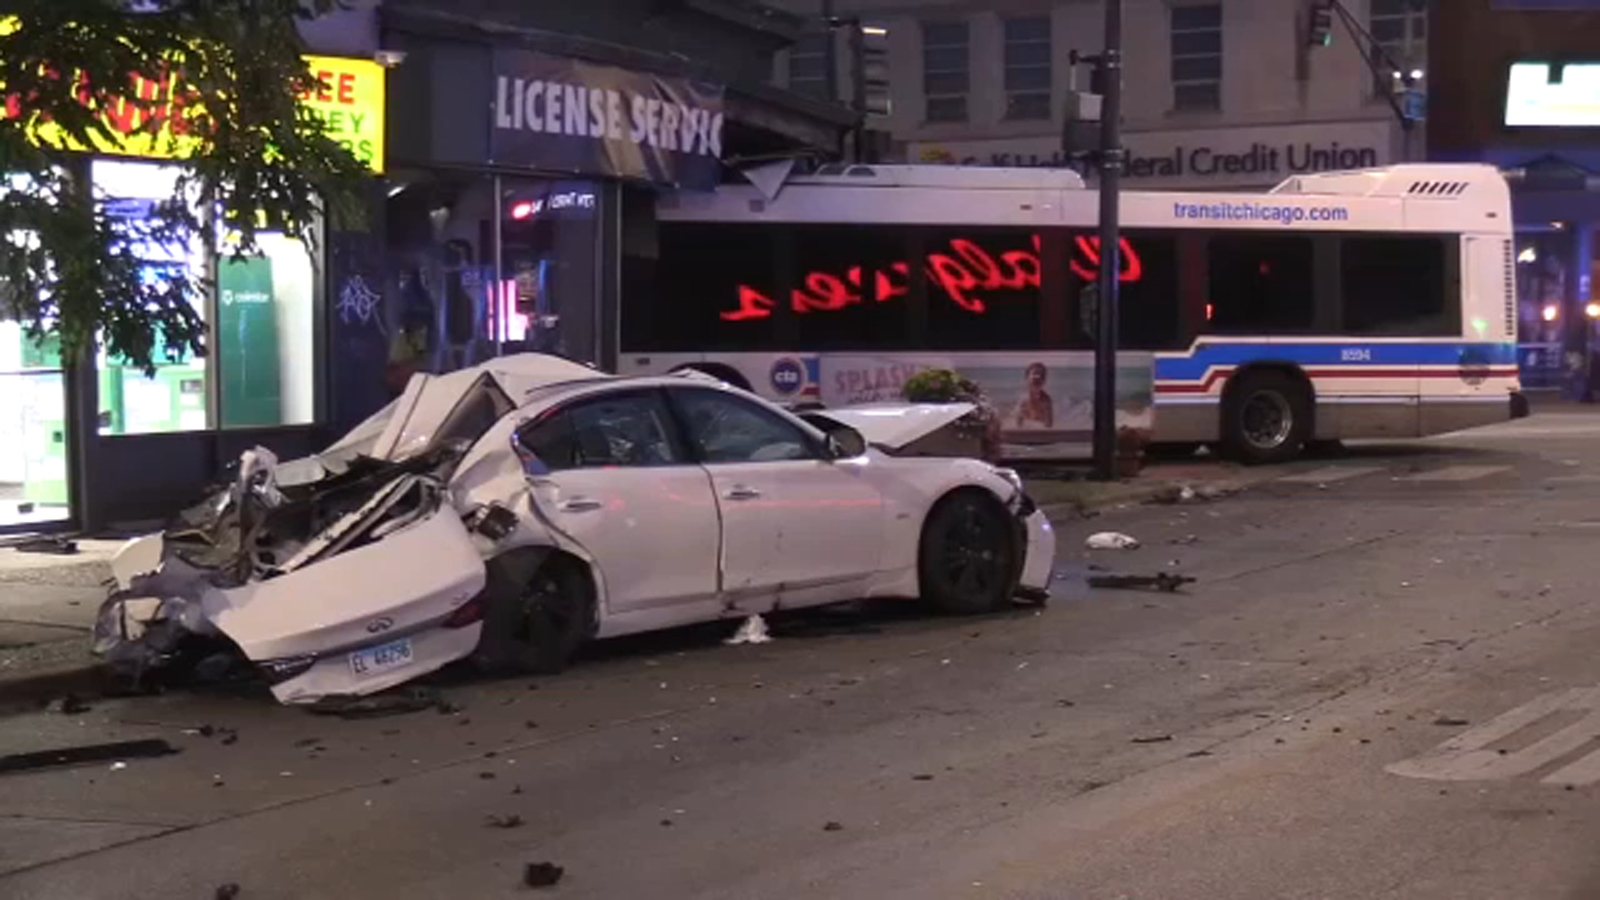 Bus crash: 4 hurt, 1 seriously after CTA bus collides with vehicle, crashes into building in Little Village, Chicago police say [Video]